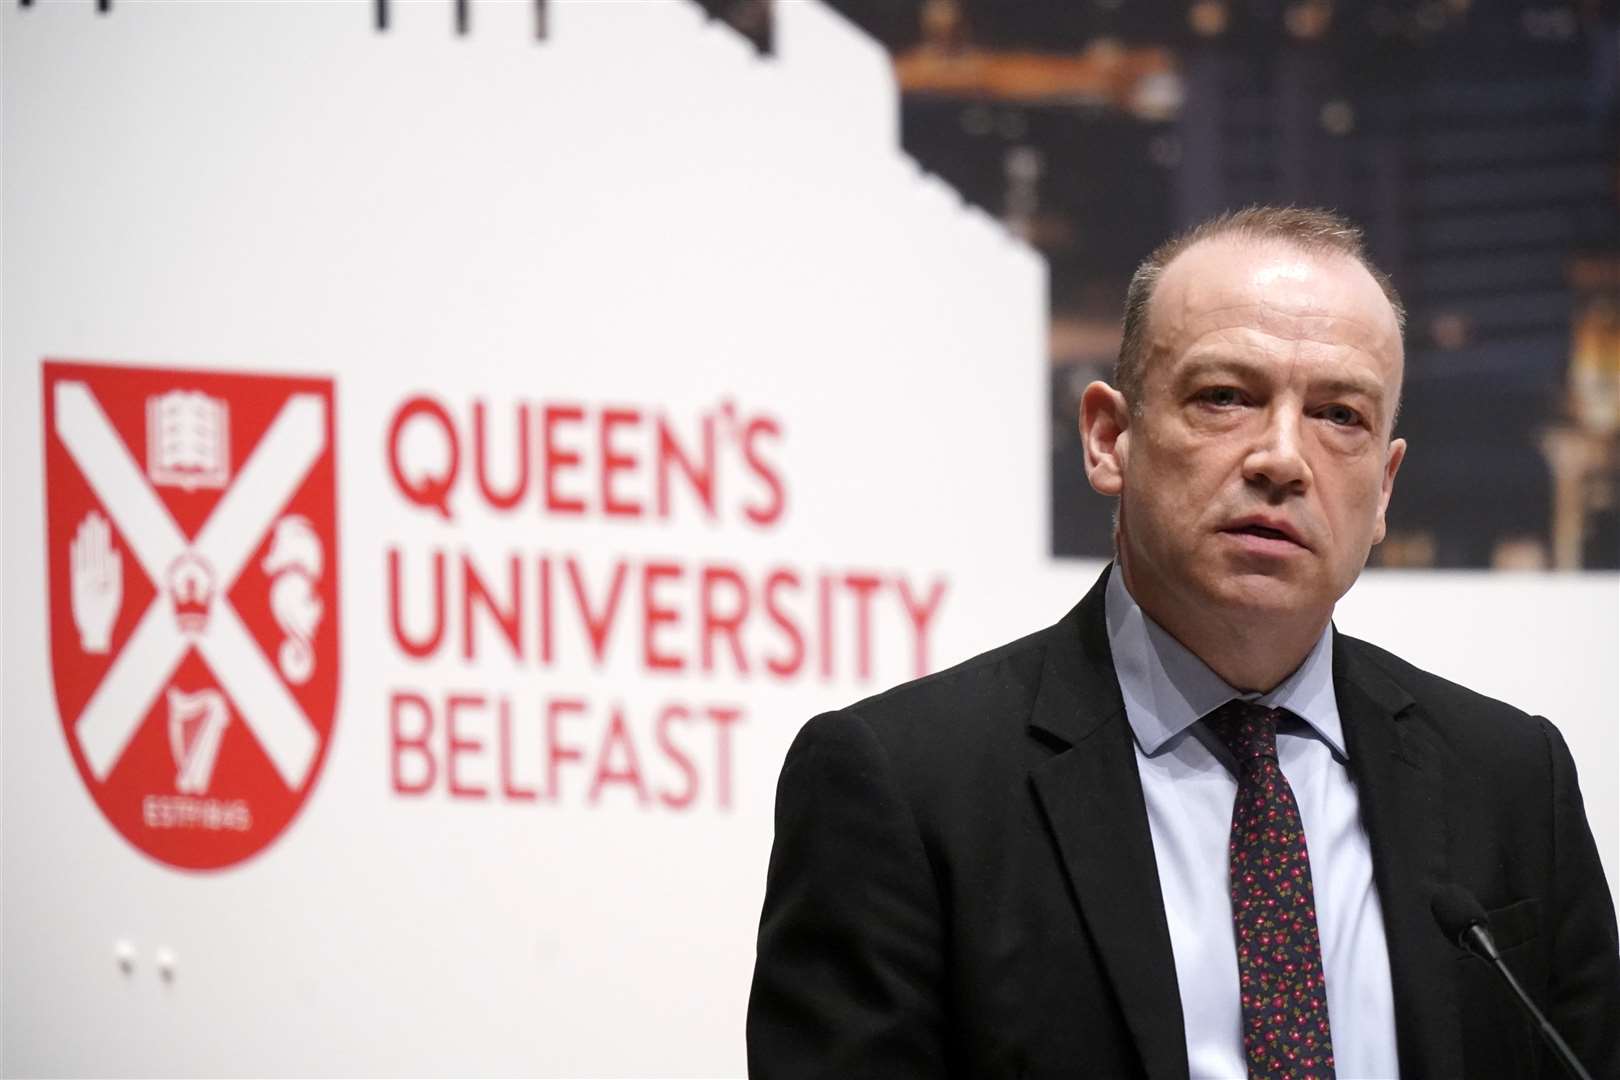 Northern Ireland Secretary Chris Heaton-Harris addressing the conference at Queen’s University (Niall Carson/PA)